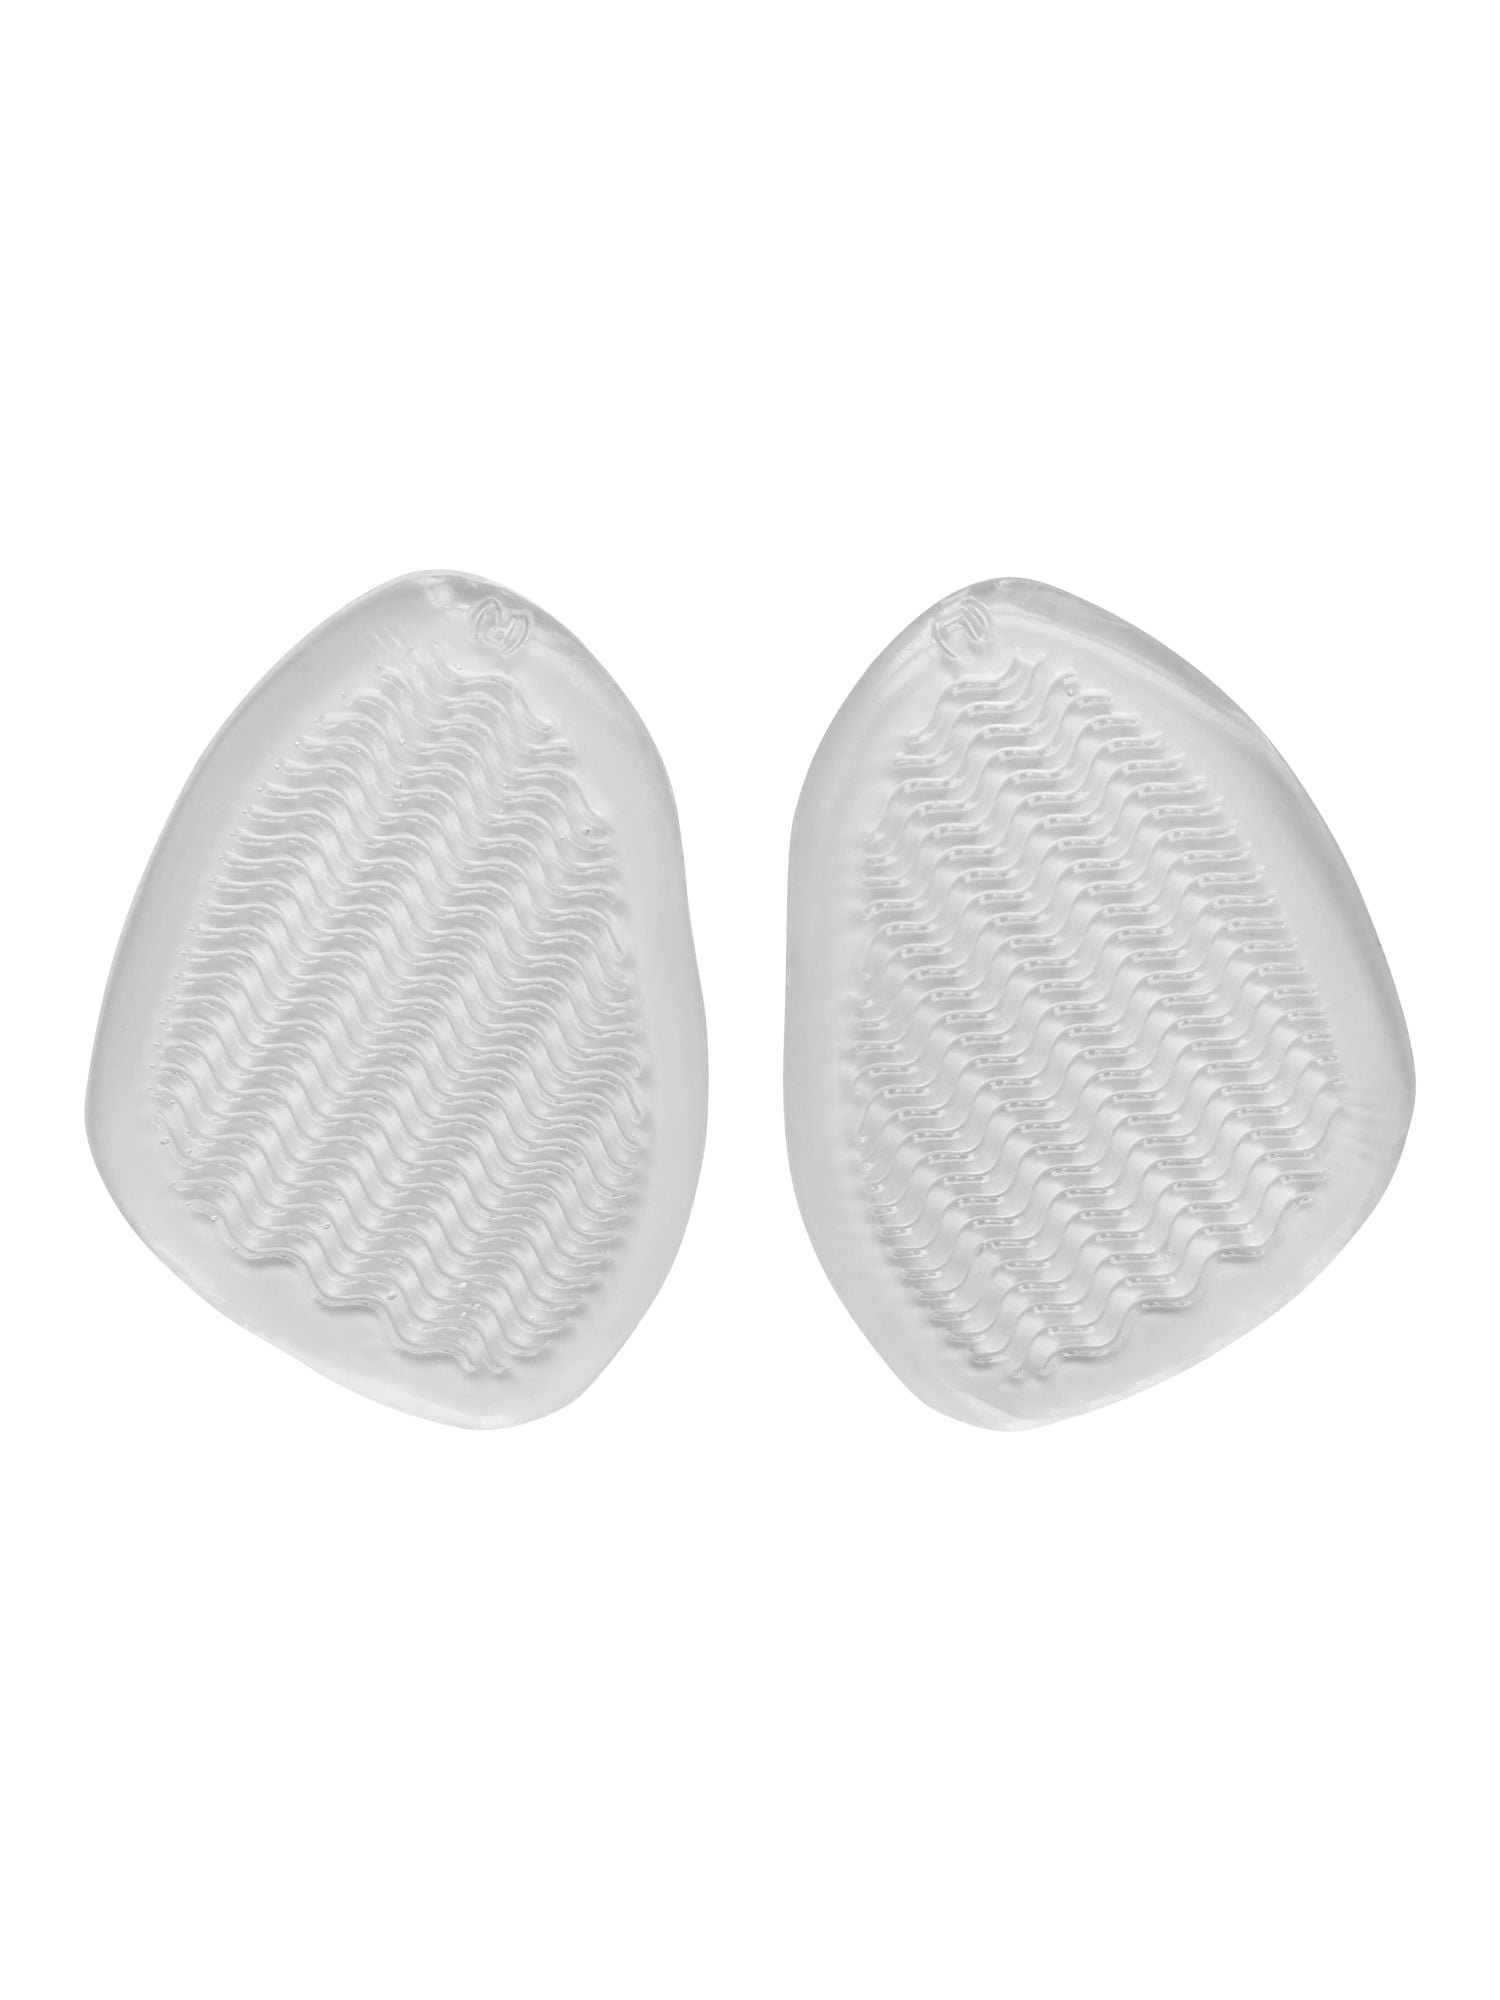 2X Gel Silicone Foot Forefoot Half Sole Insoles Shoes Care Cushion Pad Insole C8